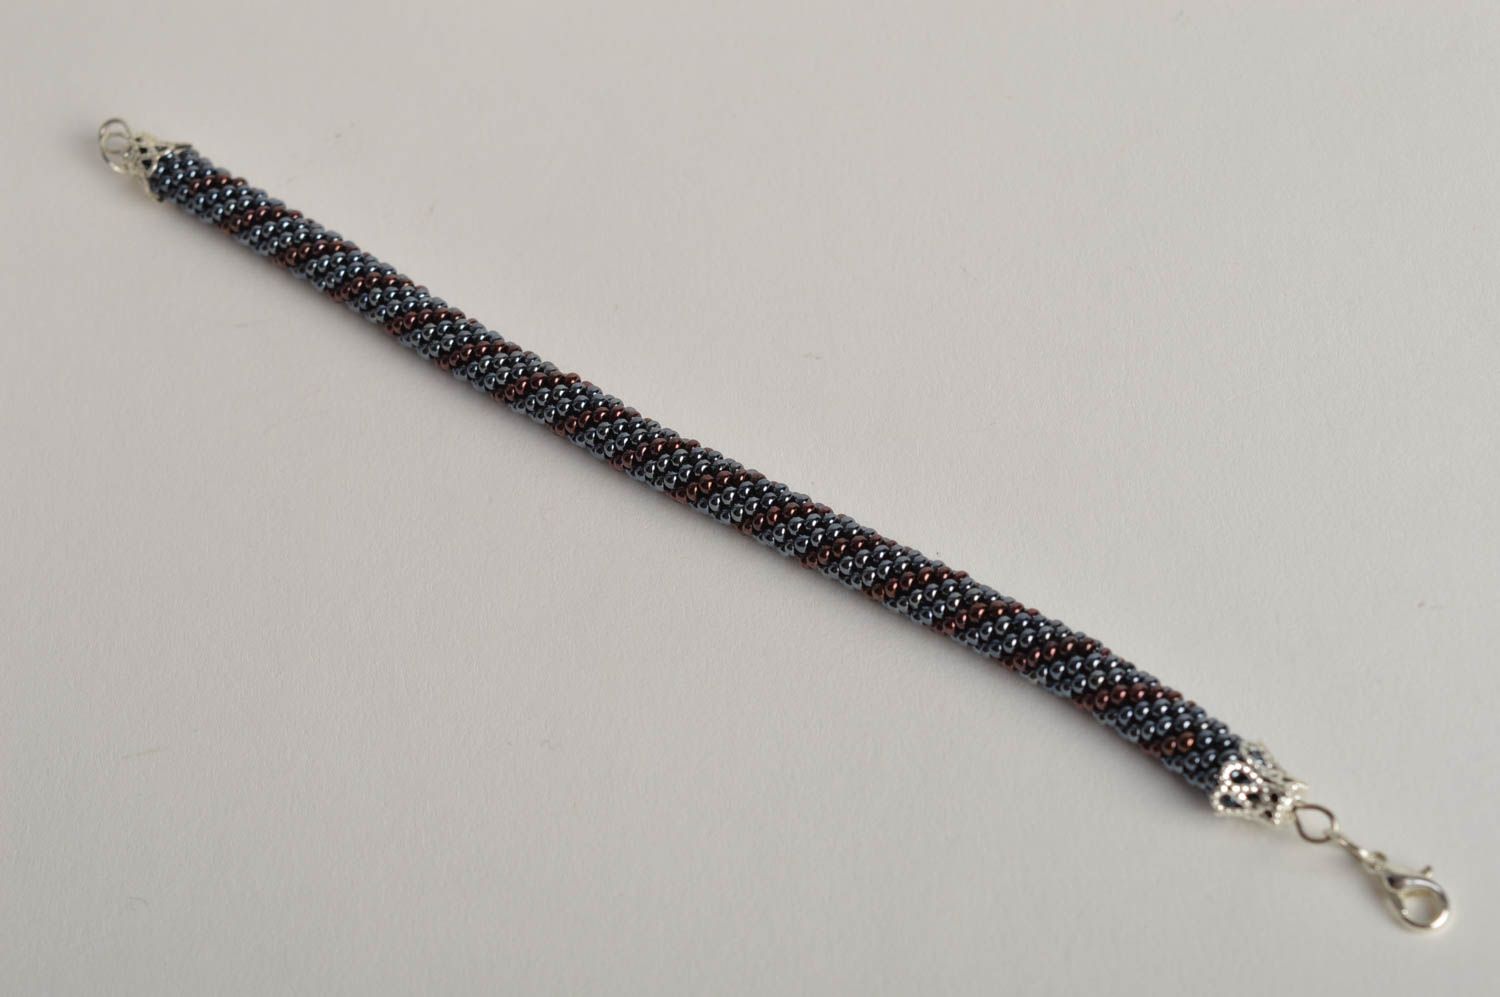 Handmade beaded cord bracelet in silver and dark cherry color photo 2